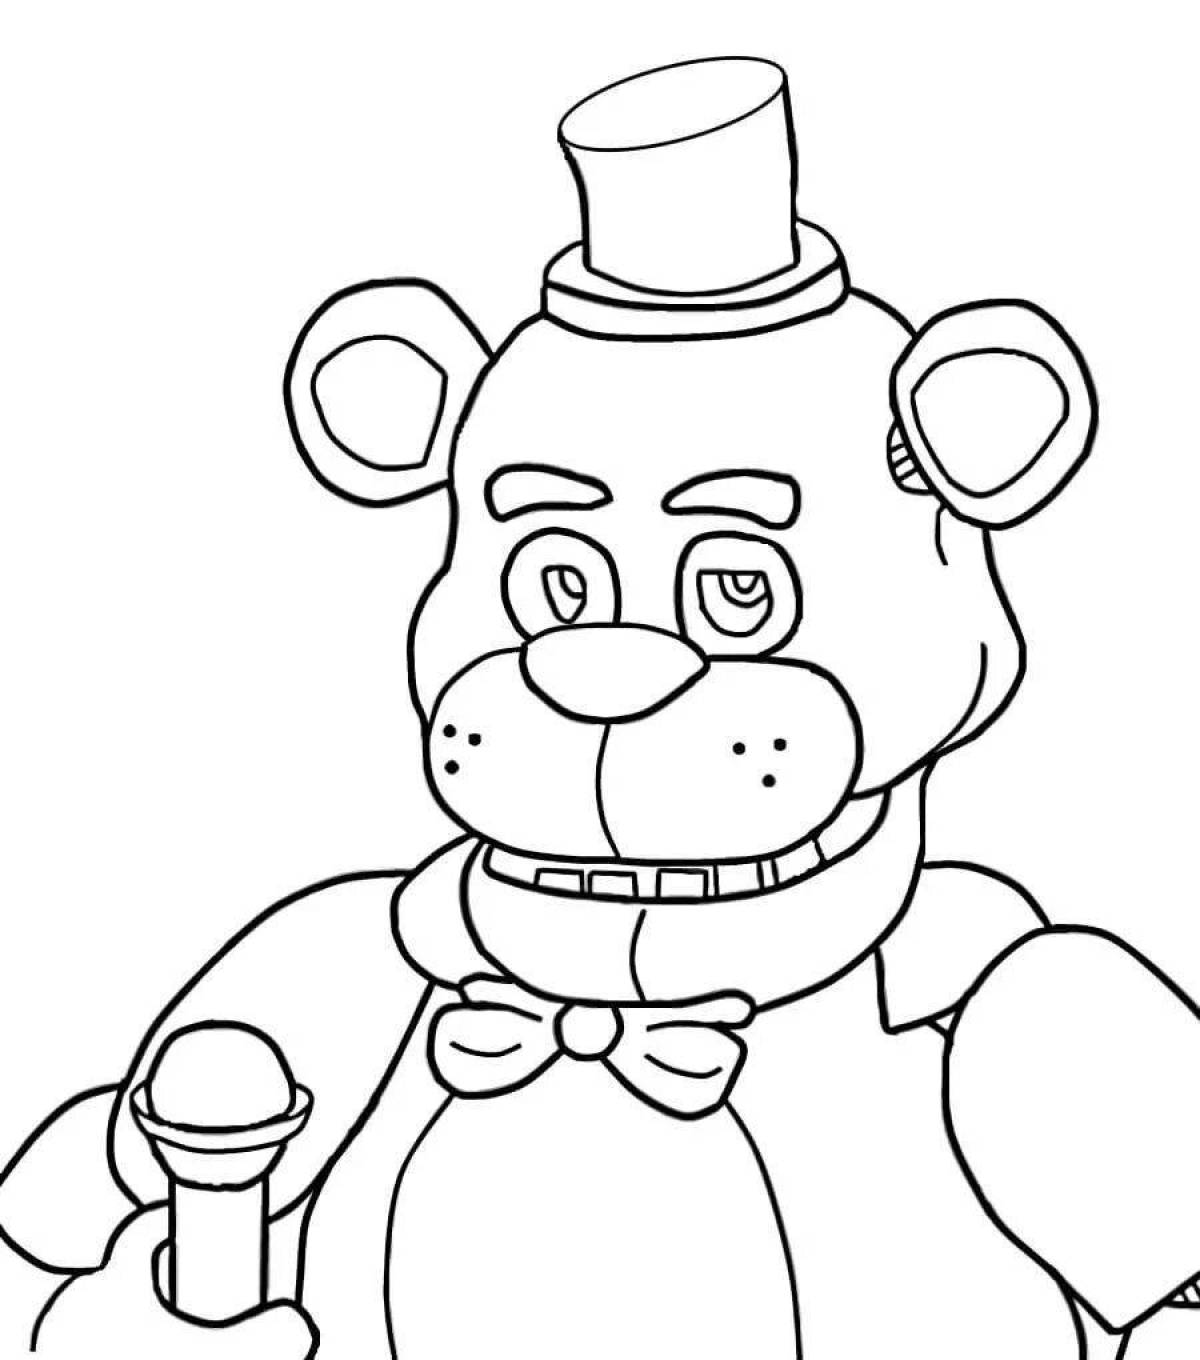 Freddy fighttime bright coloring page